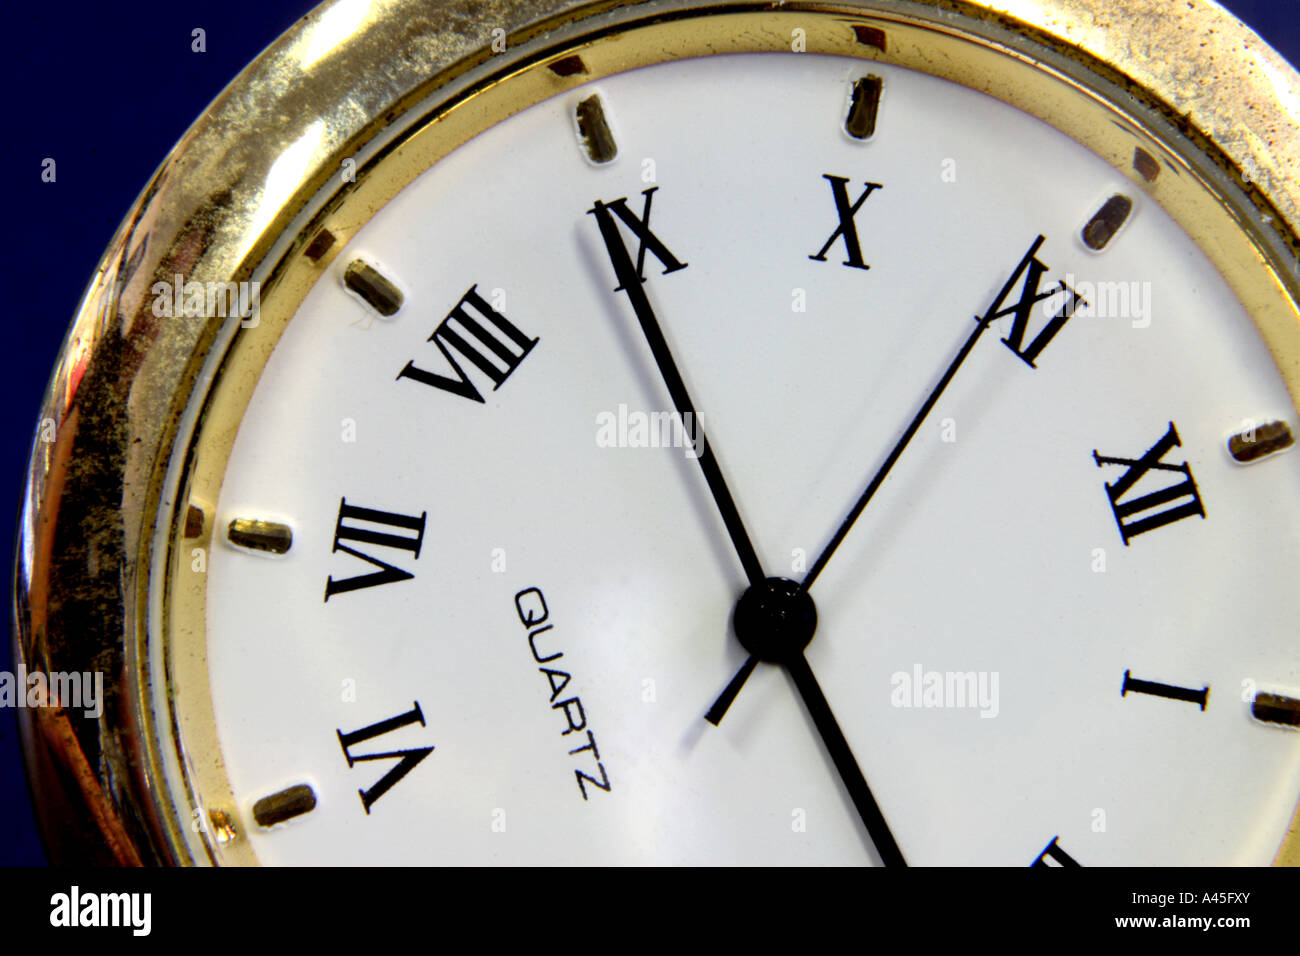 Roman Numeral Watch High Resolution Stock Photography and Images - Alamy